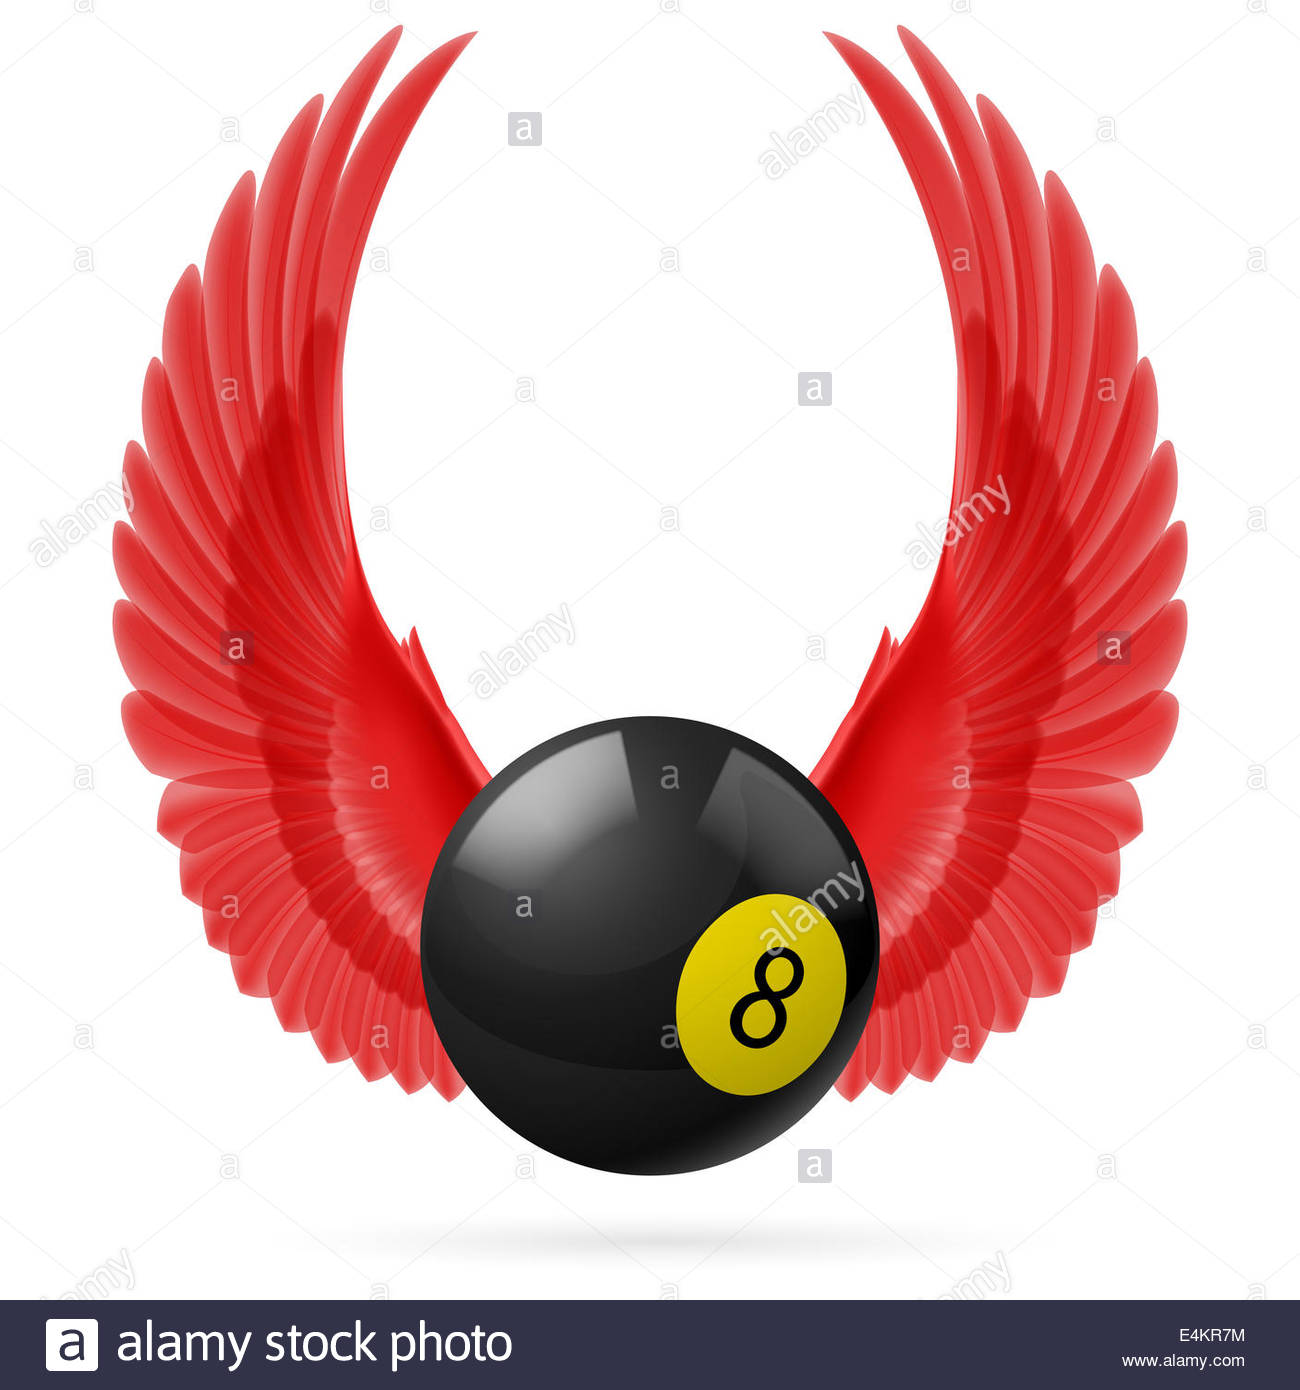 Red Wings With Black Billiard Ball On White Background Stock Photo